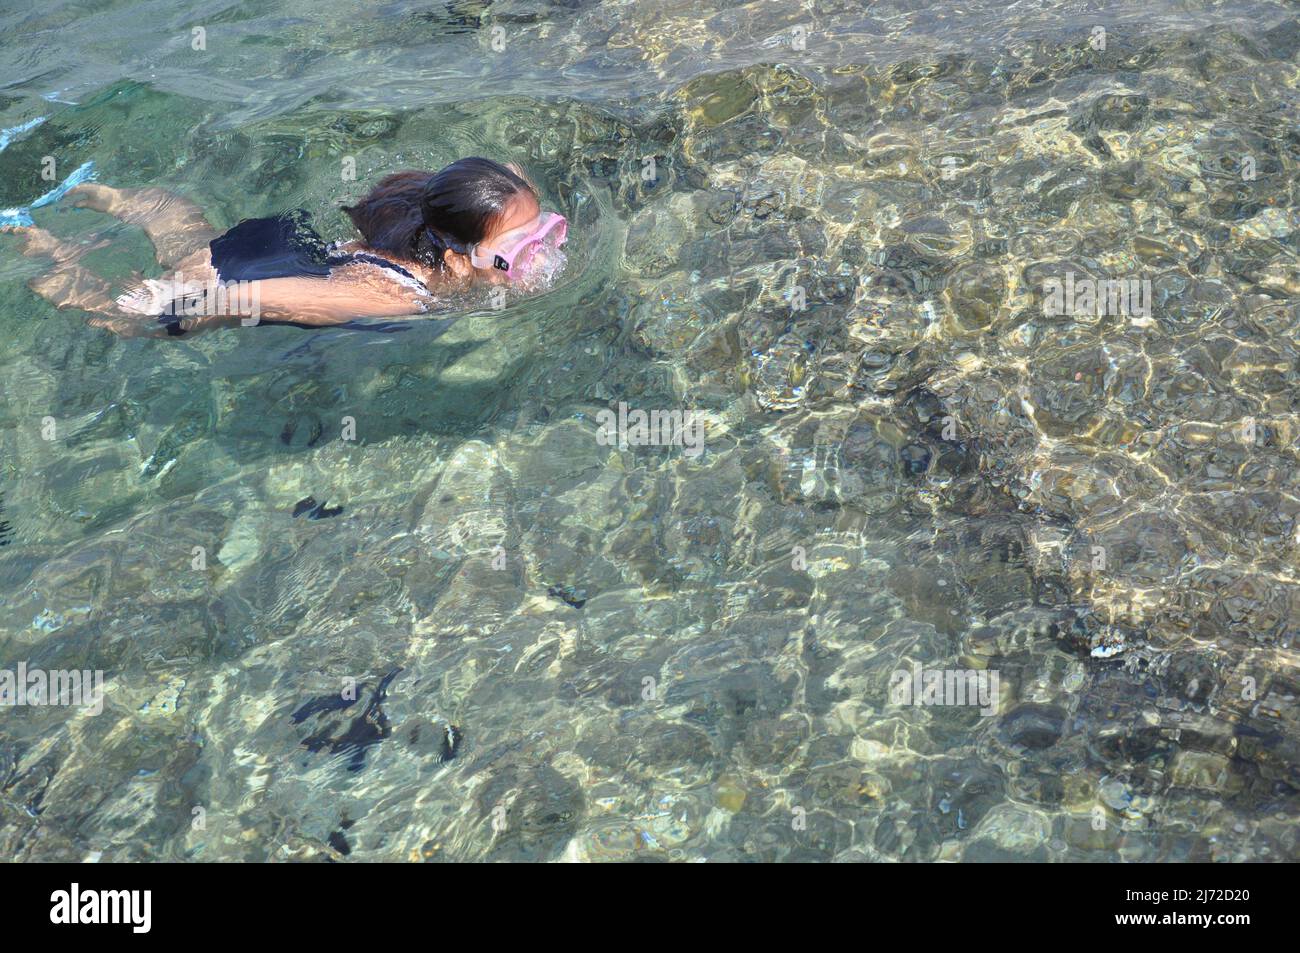 Mali Losinj,Croatia July 2020. Girl diving into beautiful clear Adriatic Sea.Happy family,girl in snorkeling mask dive underwater with tropical fishes Stock Photo